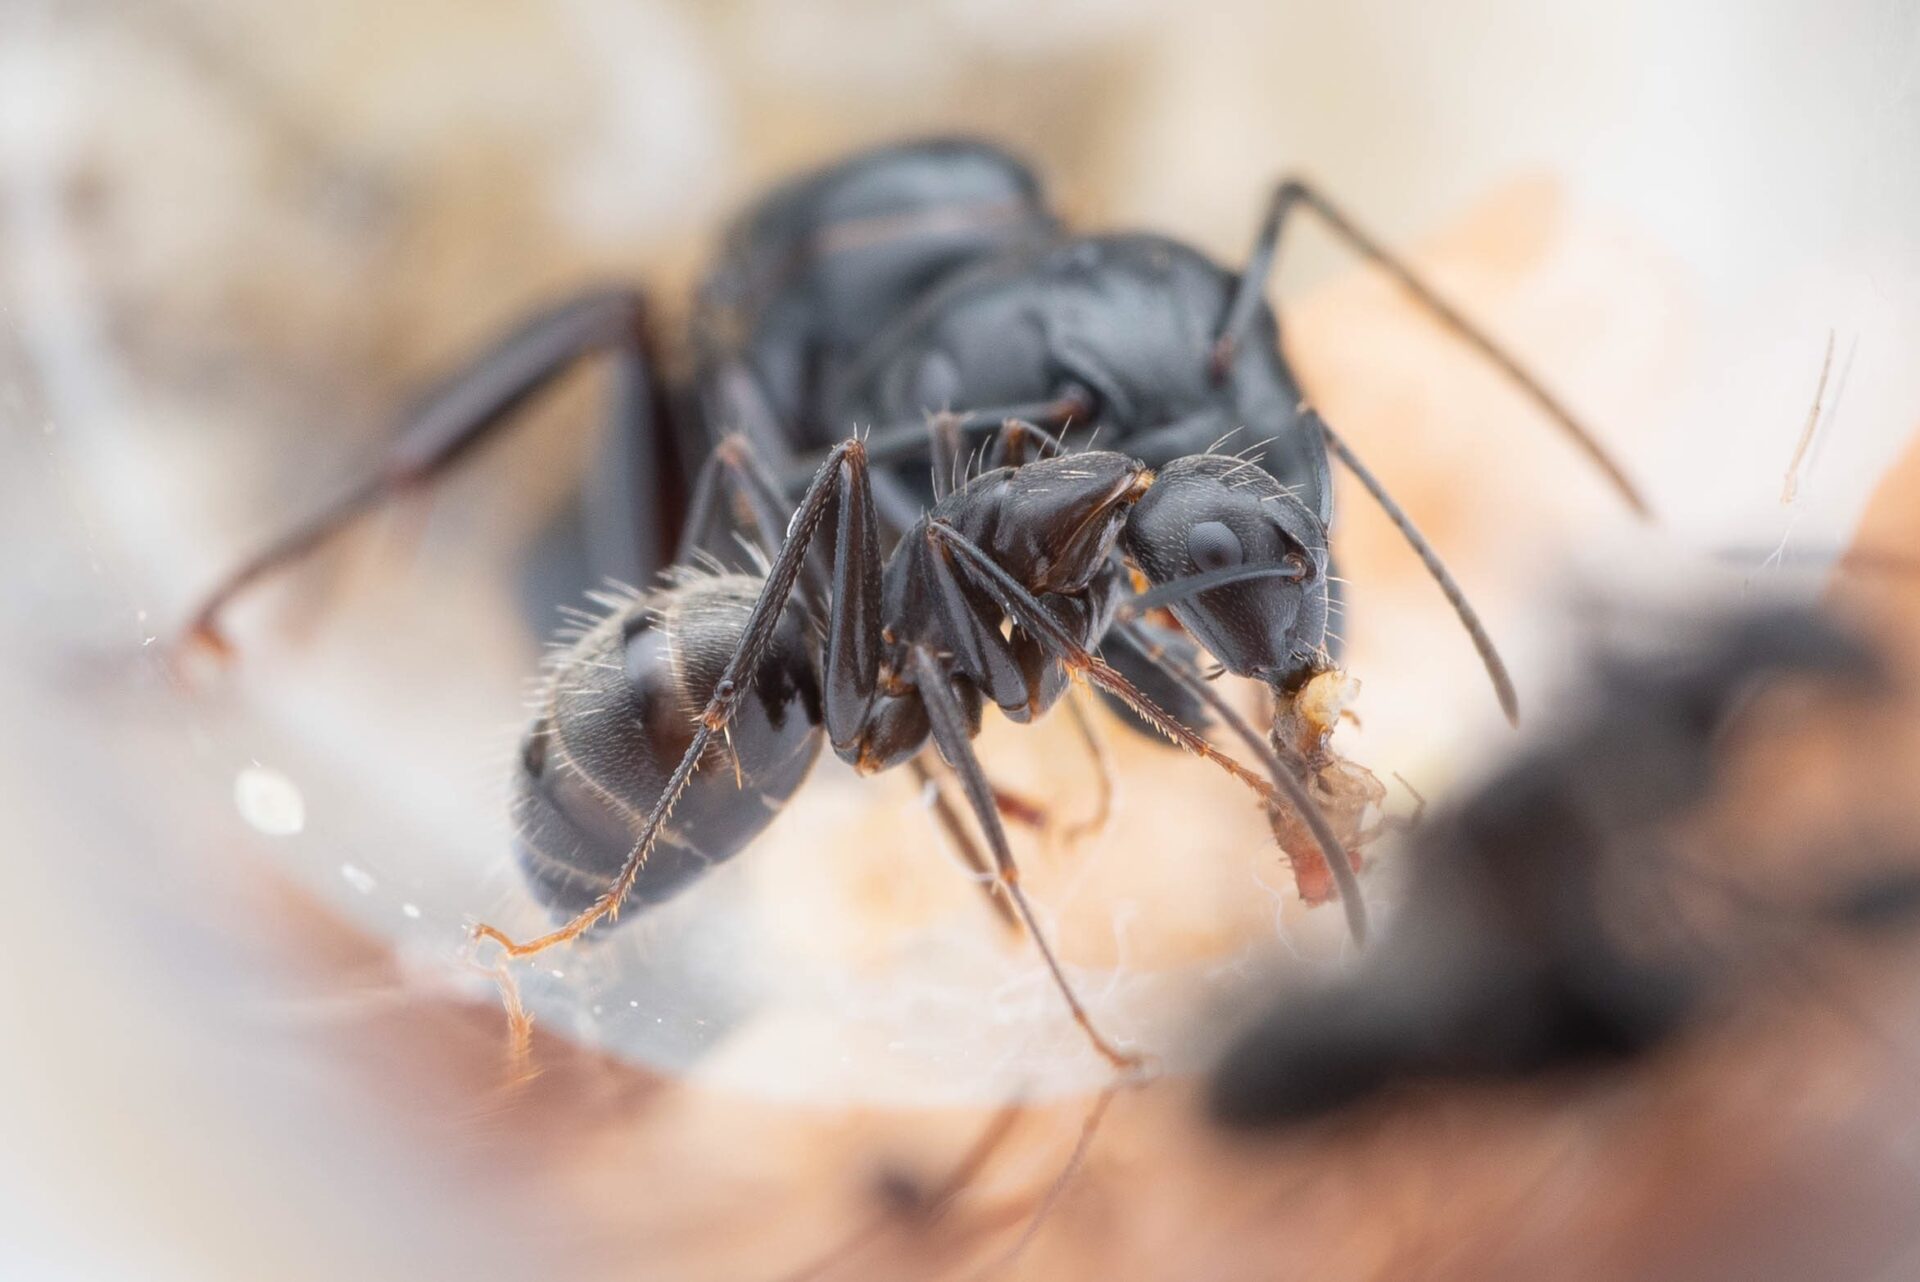 A Camponotus pennsylvanicus nanitic eats a fruit fly. Photo courtesy of Max Hike.